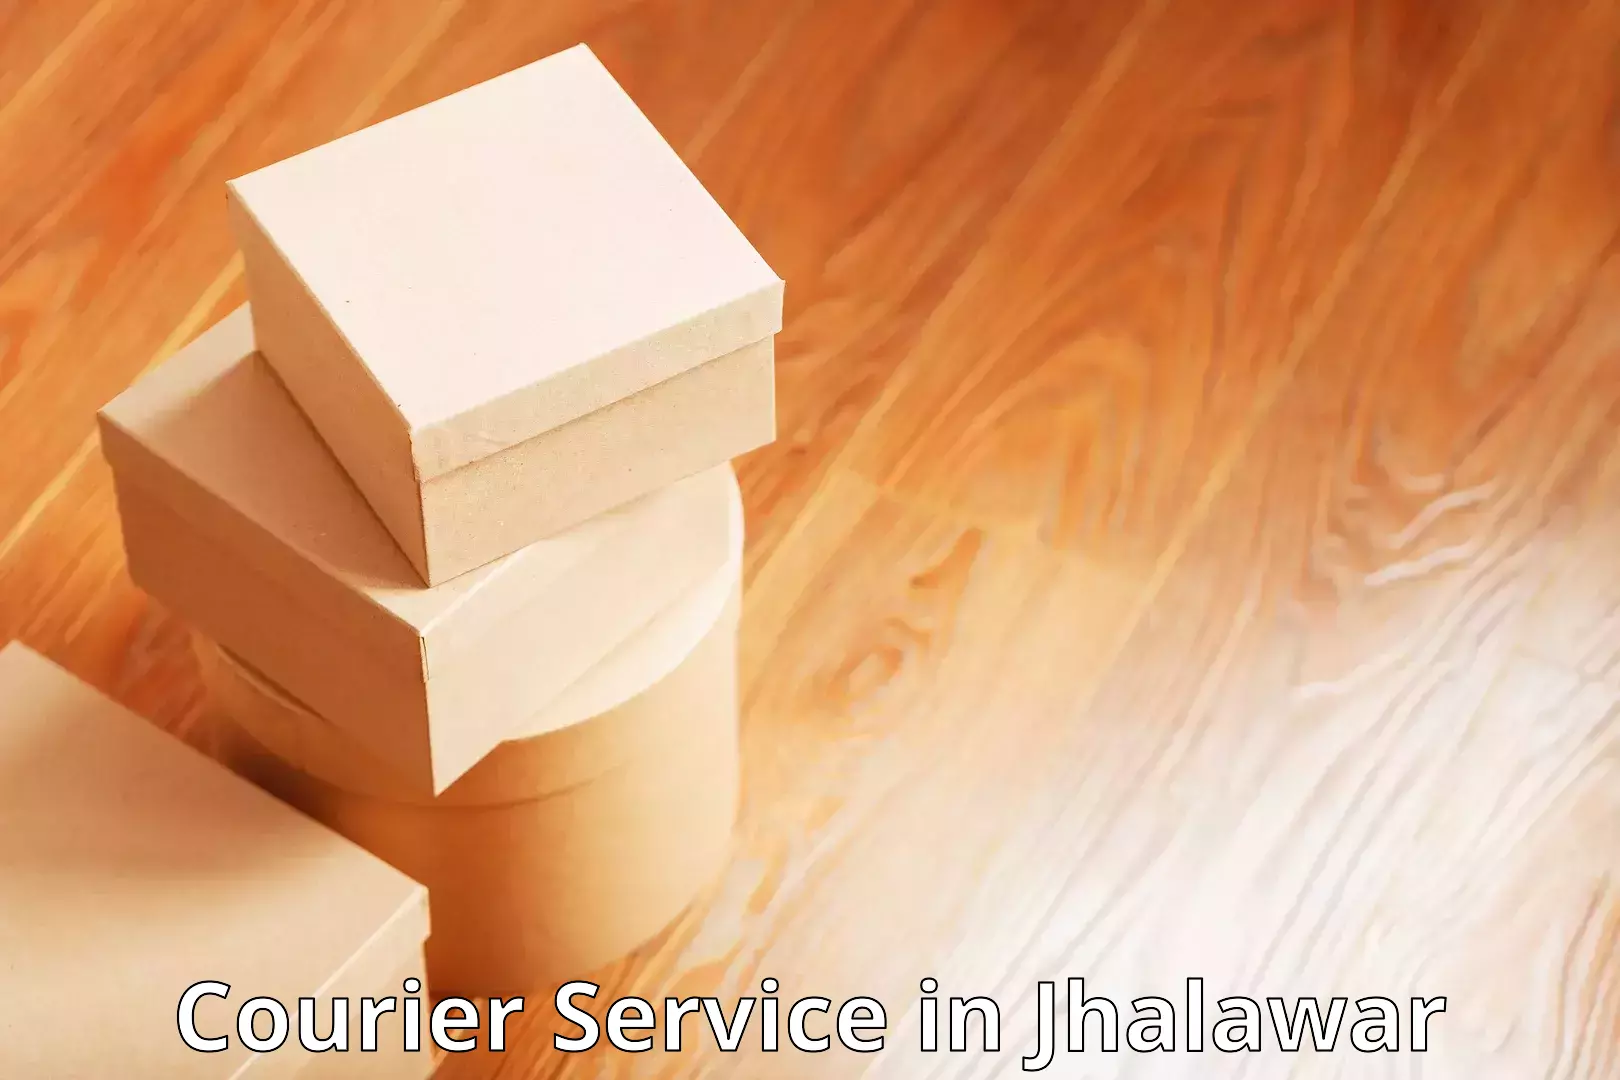 Express package services in Jhalawar